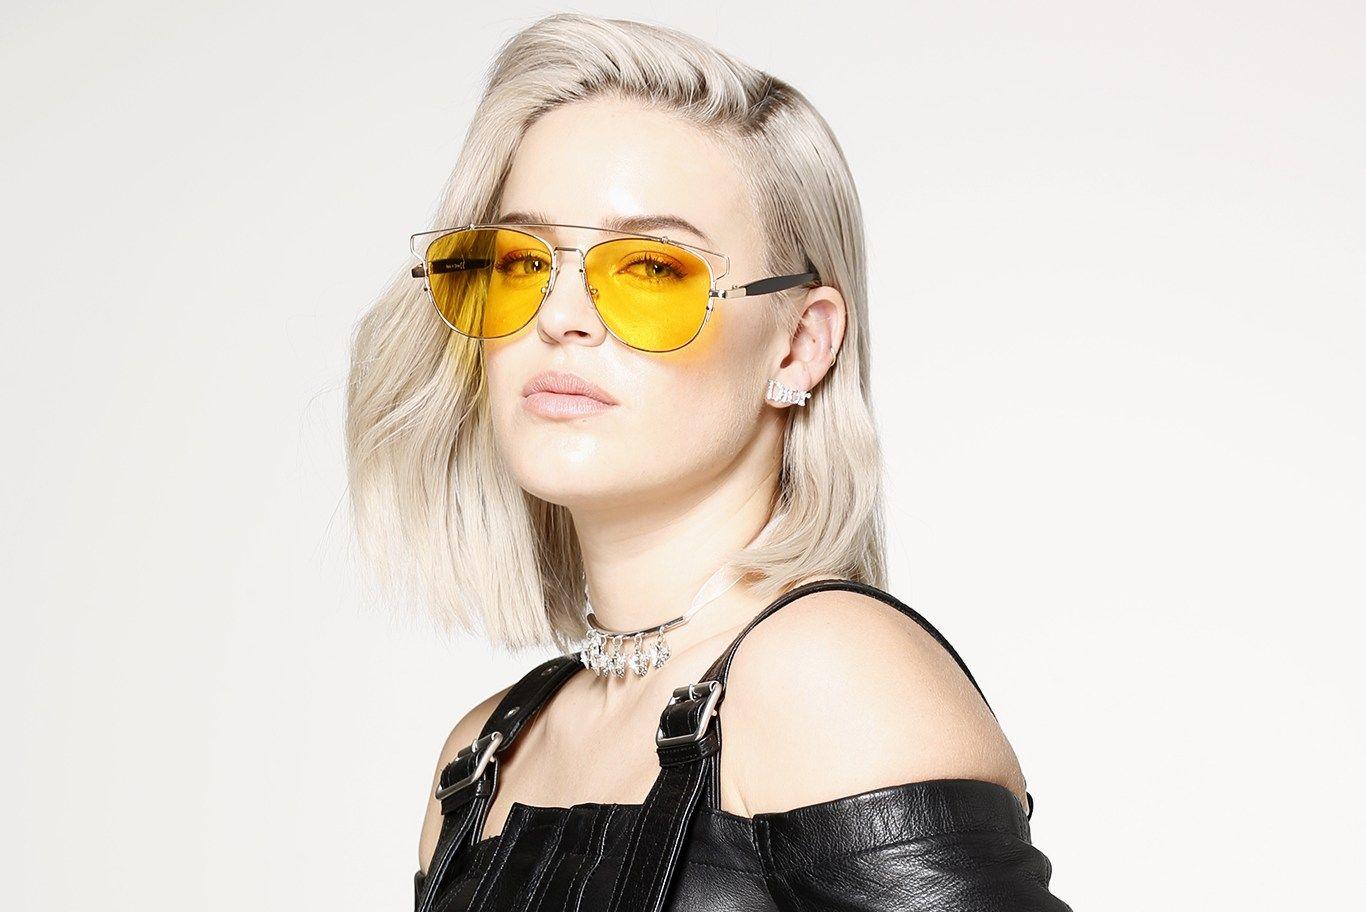 Meet Anne Marie, The Ed Sheeran Approved Singer On The Rise. Anne